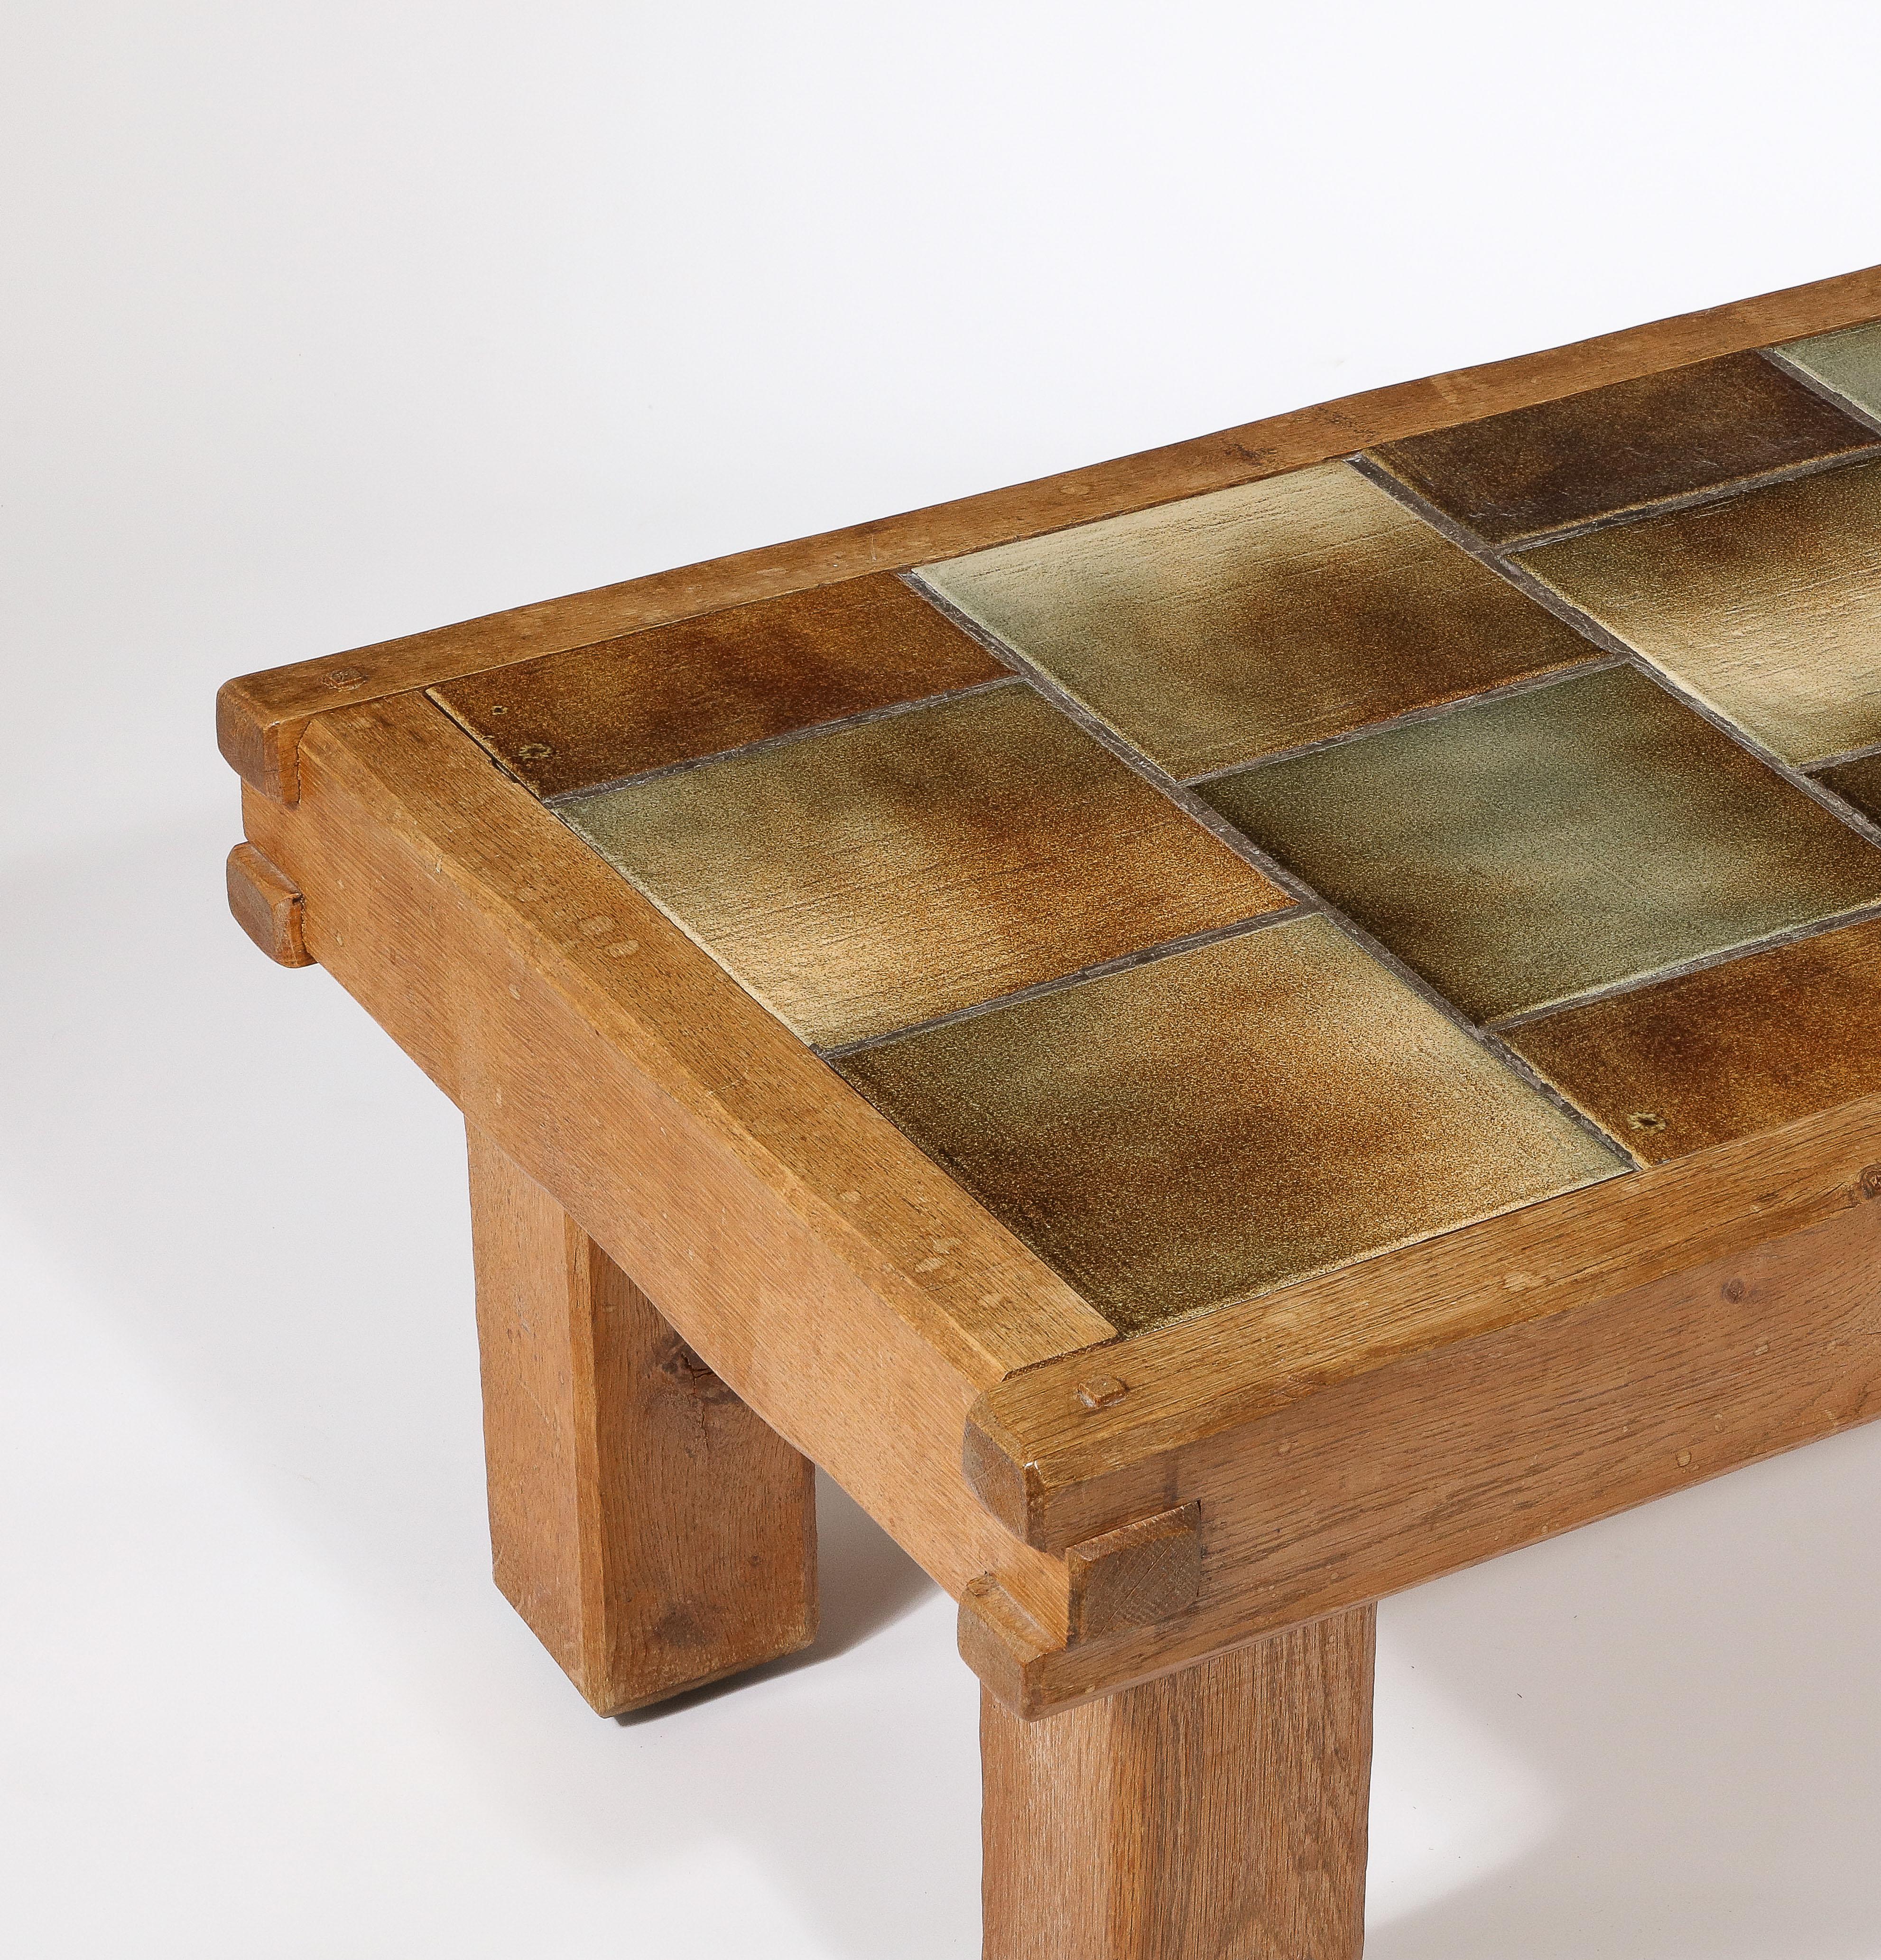 Small Brutalist Coffee Table with Ceramic Tile Top & Oak, France 1960's For Sale 11